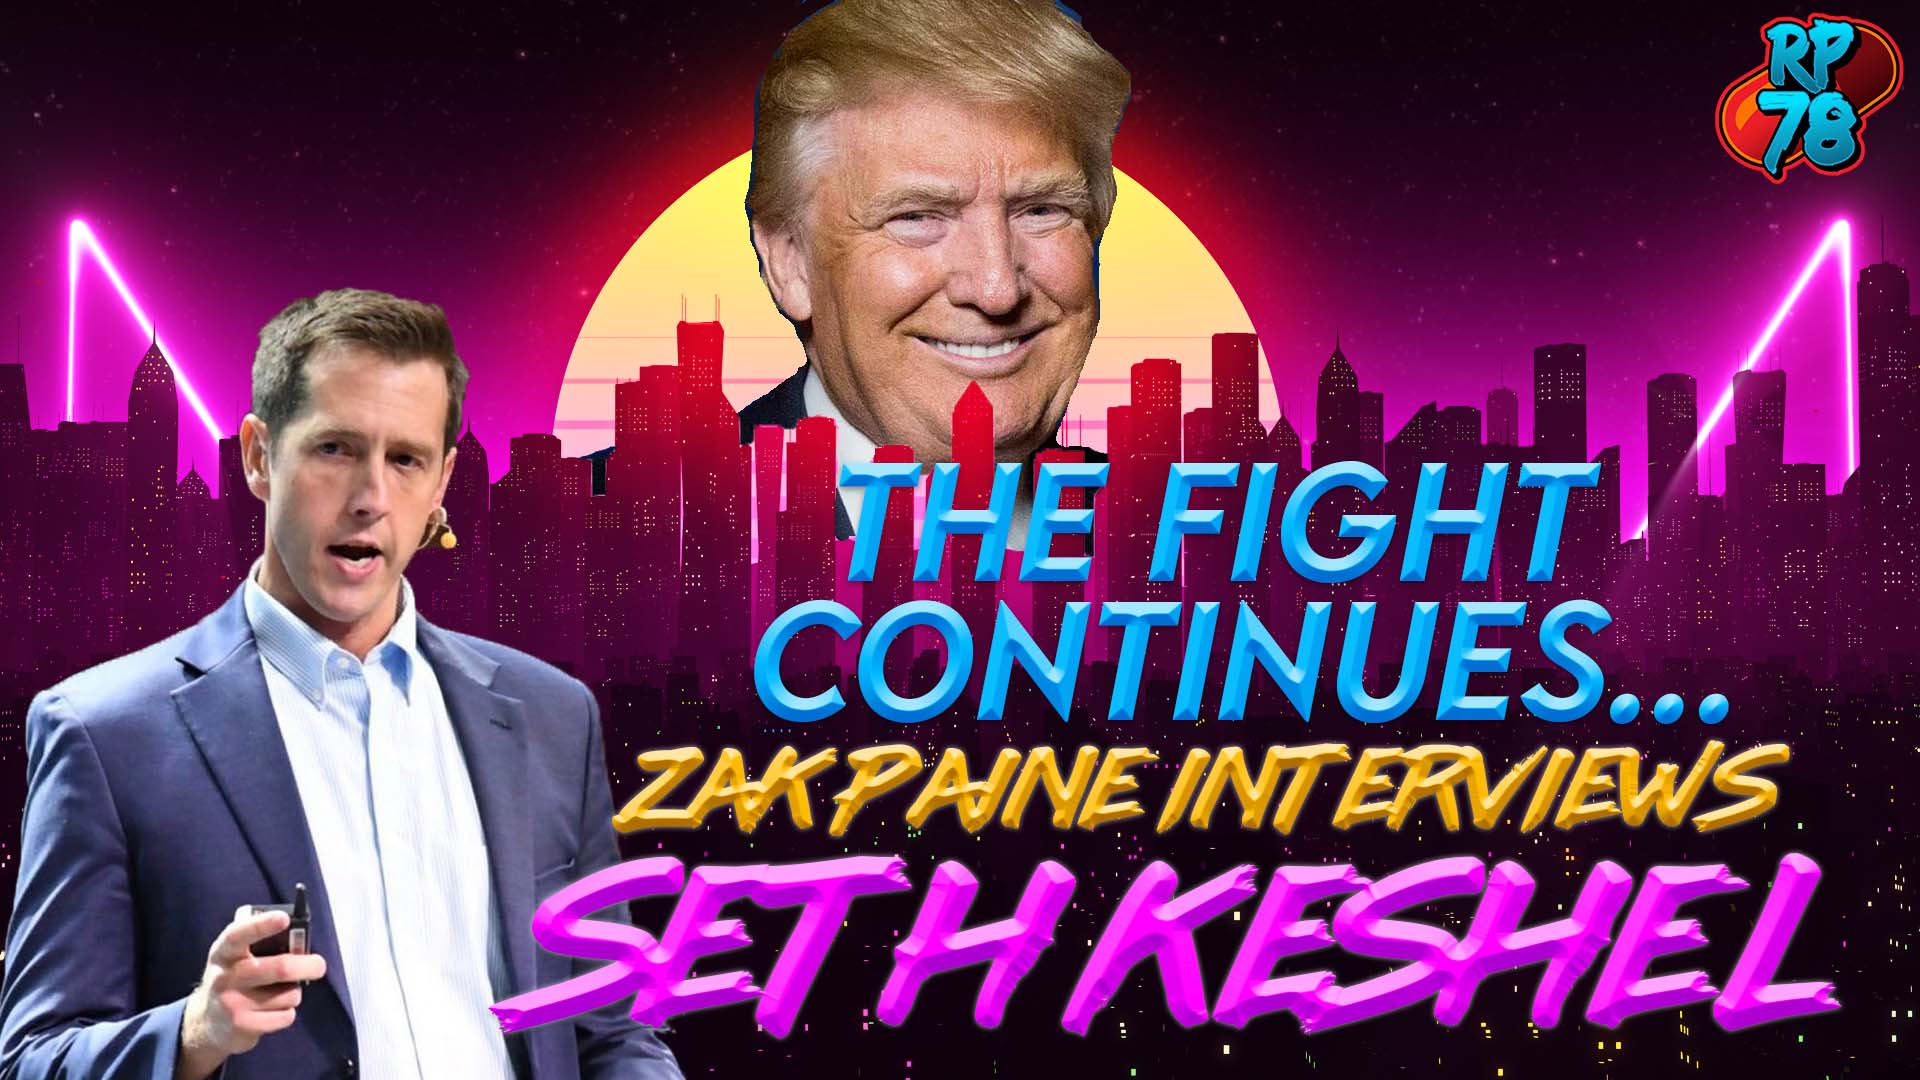 The Fight Continues - Zak Paine Interviews Seth Keshel